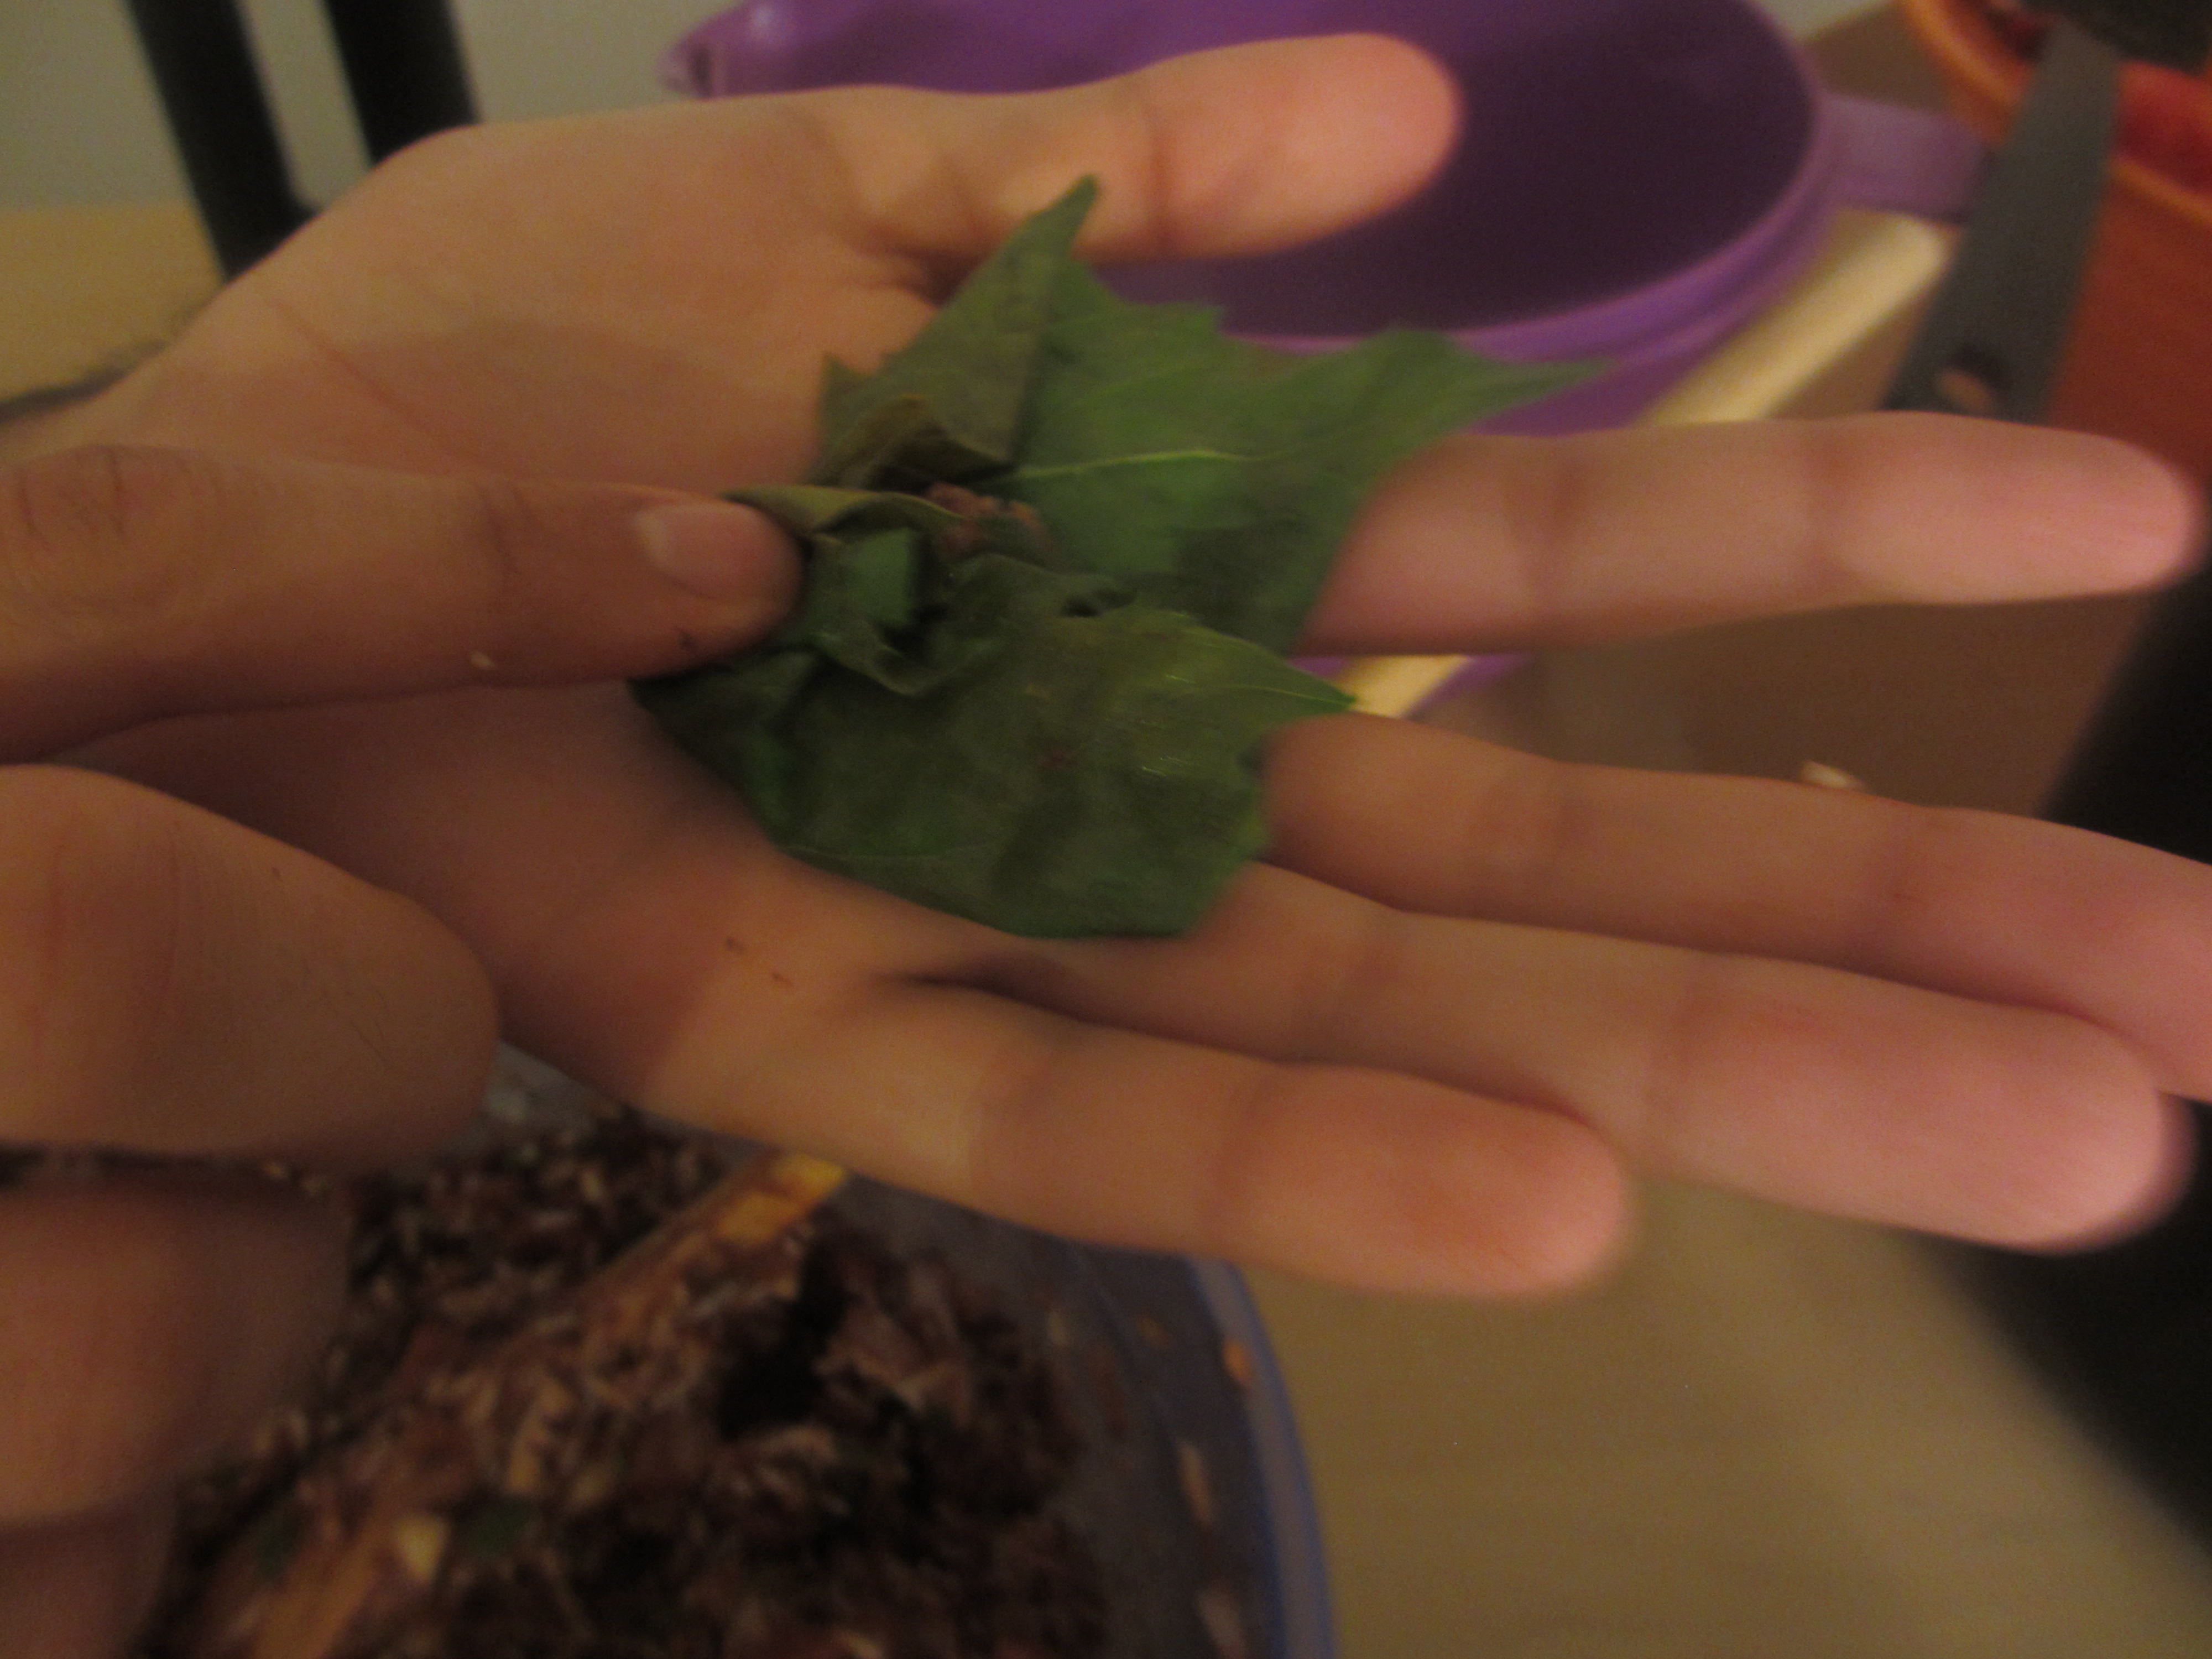 Grape leaf being stuffed on the palm of a hand